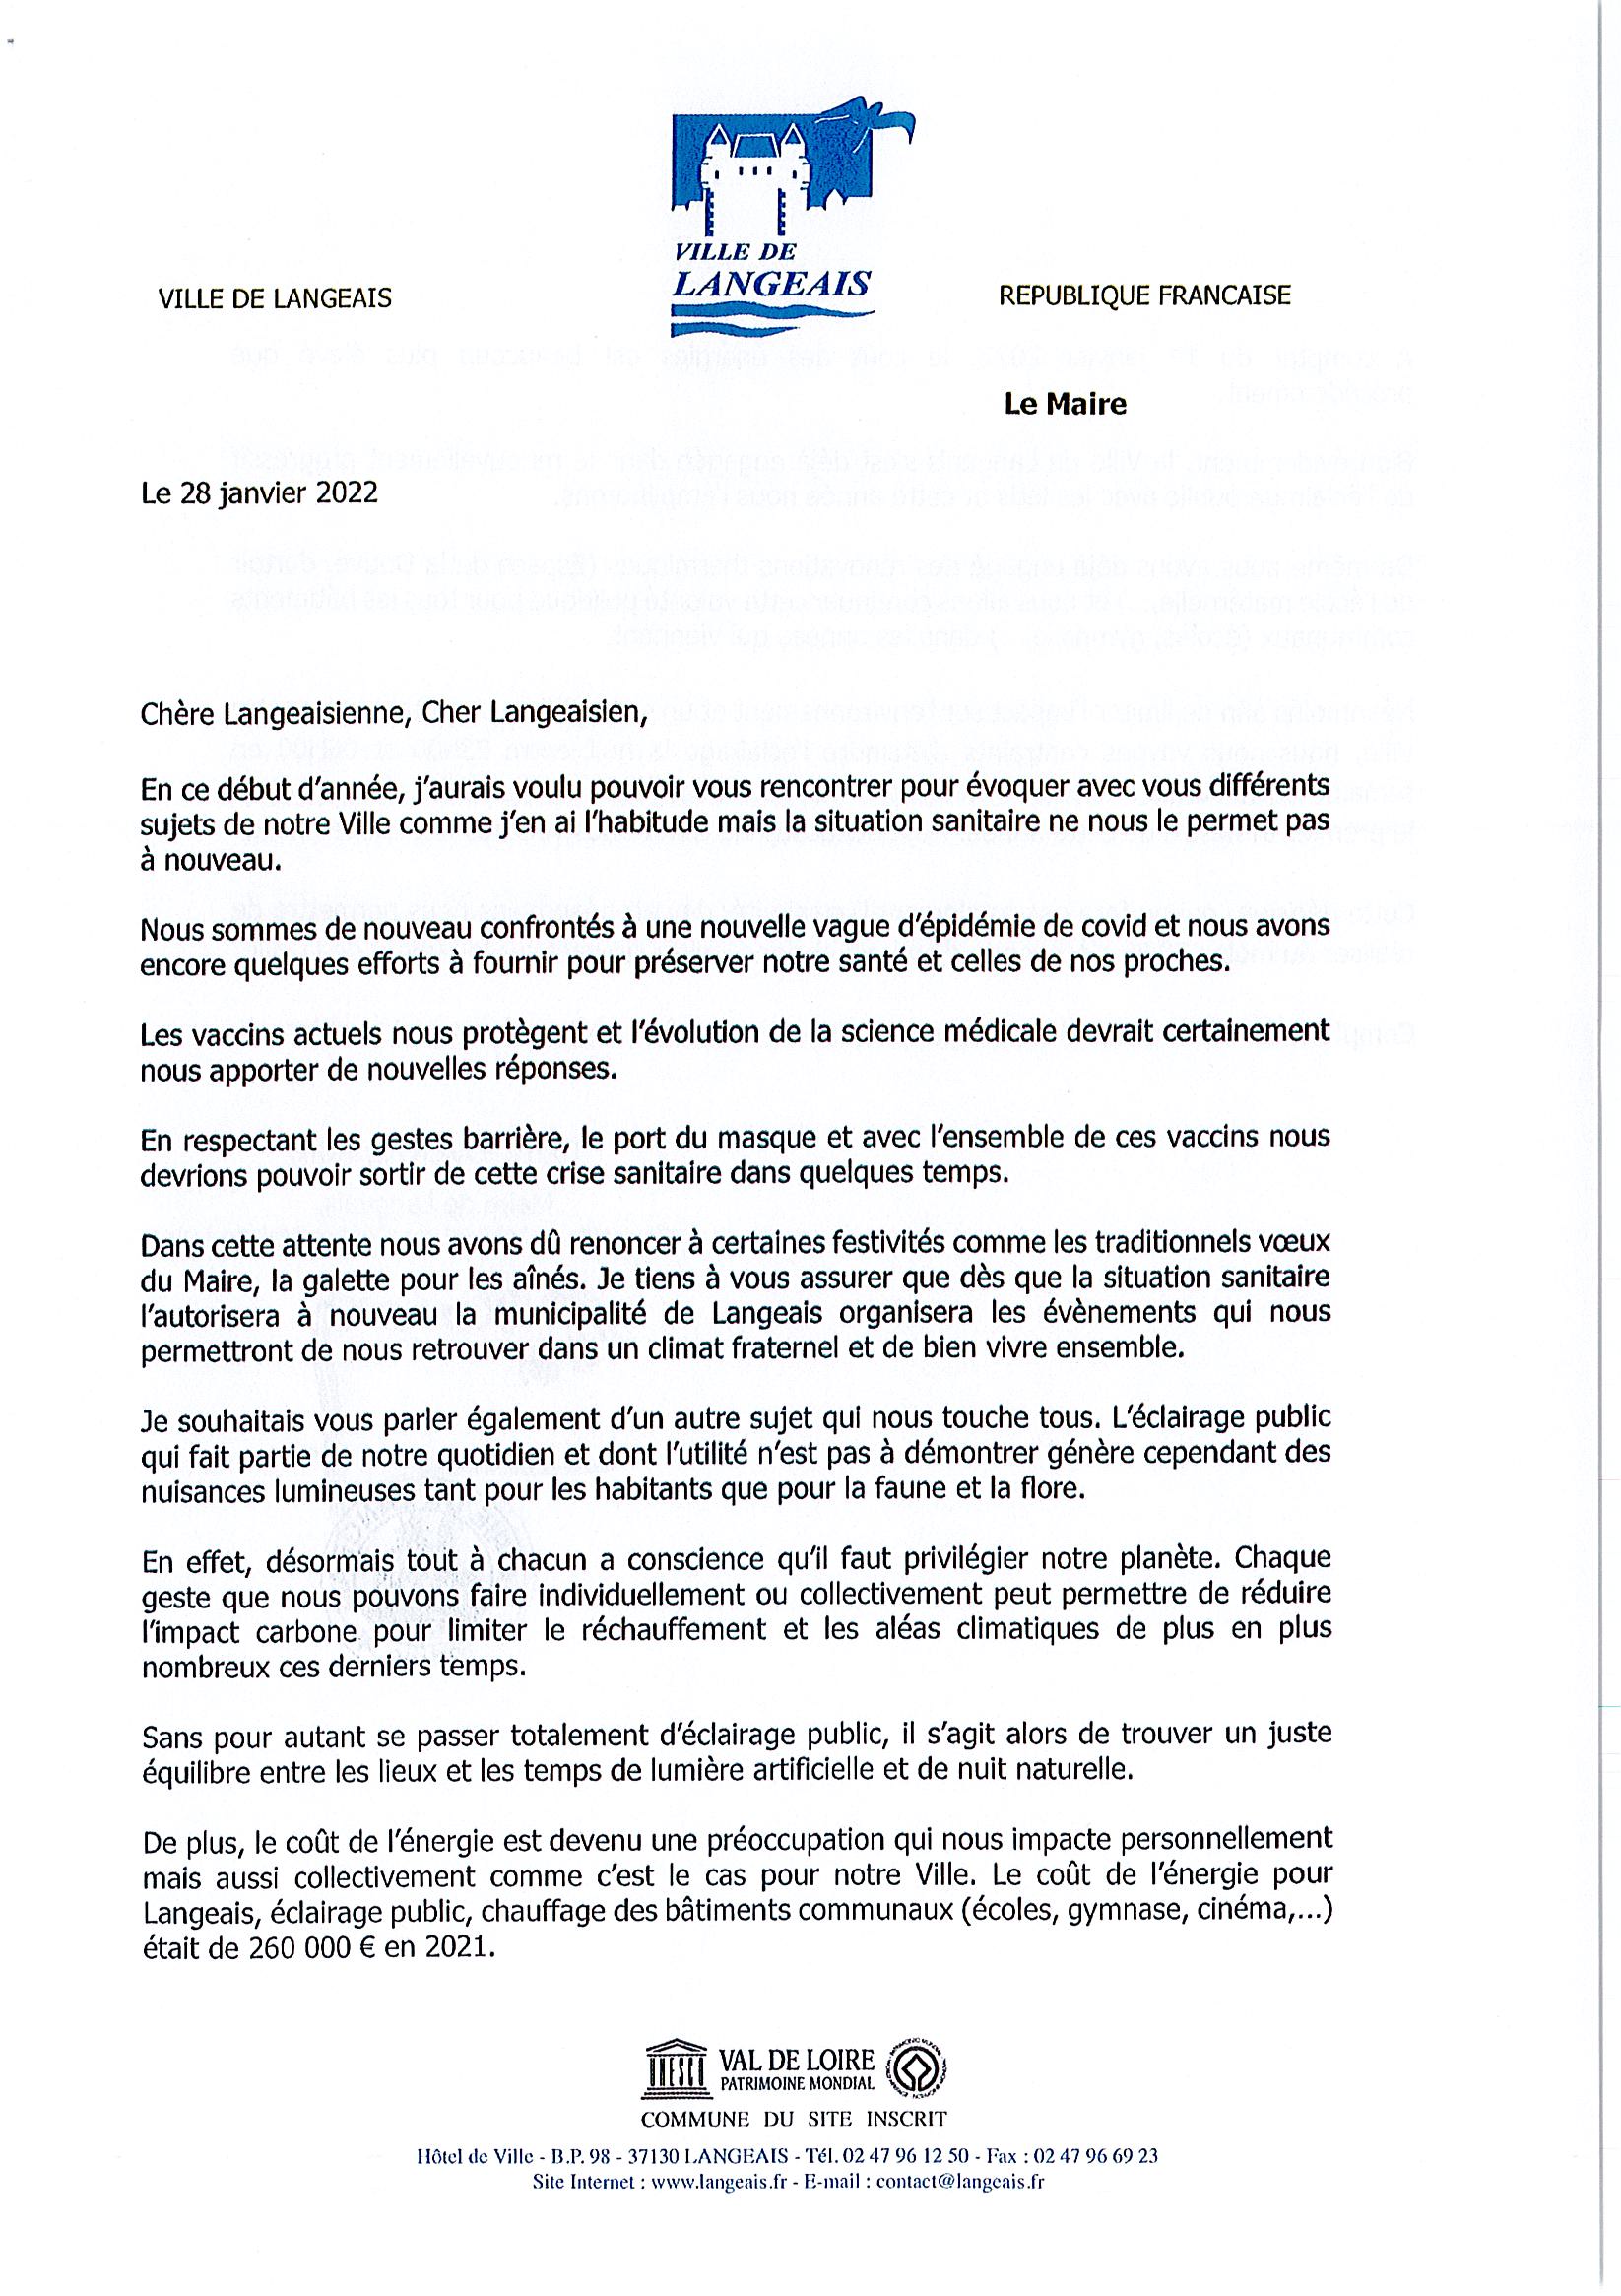 COURRIER MAIRE_Page_1.jpg